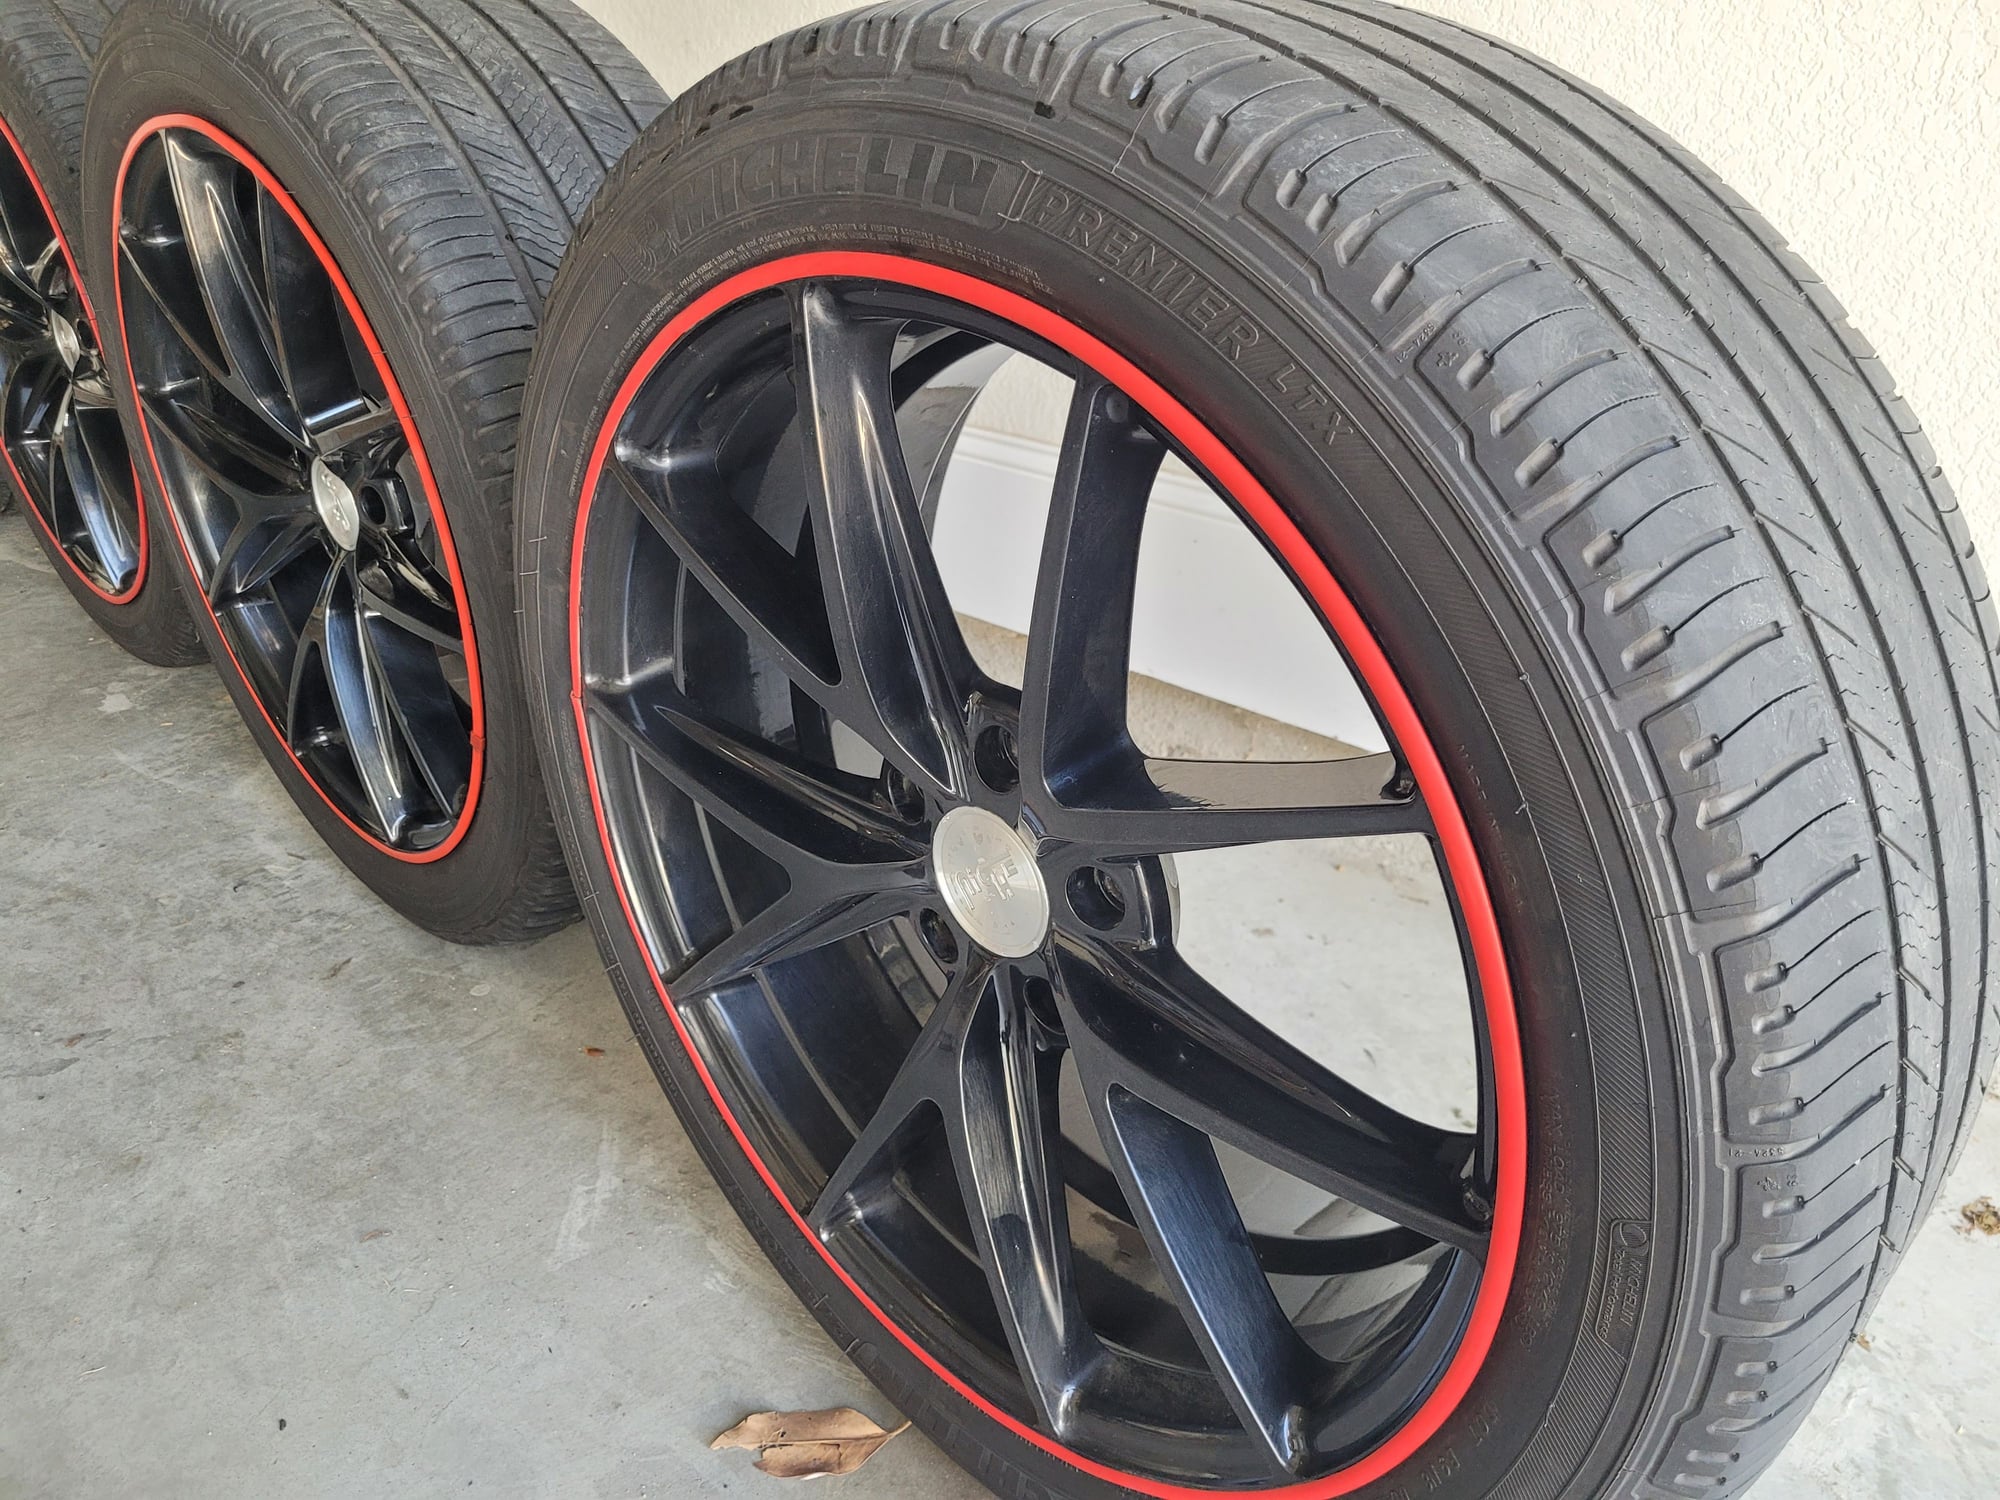 Wheels and Tires/Axles - Niche 21" wheels Michelin Premier LTX Tires 2007-2016 Q7 - Used - Katy, TX 77493, United States